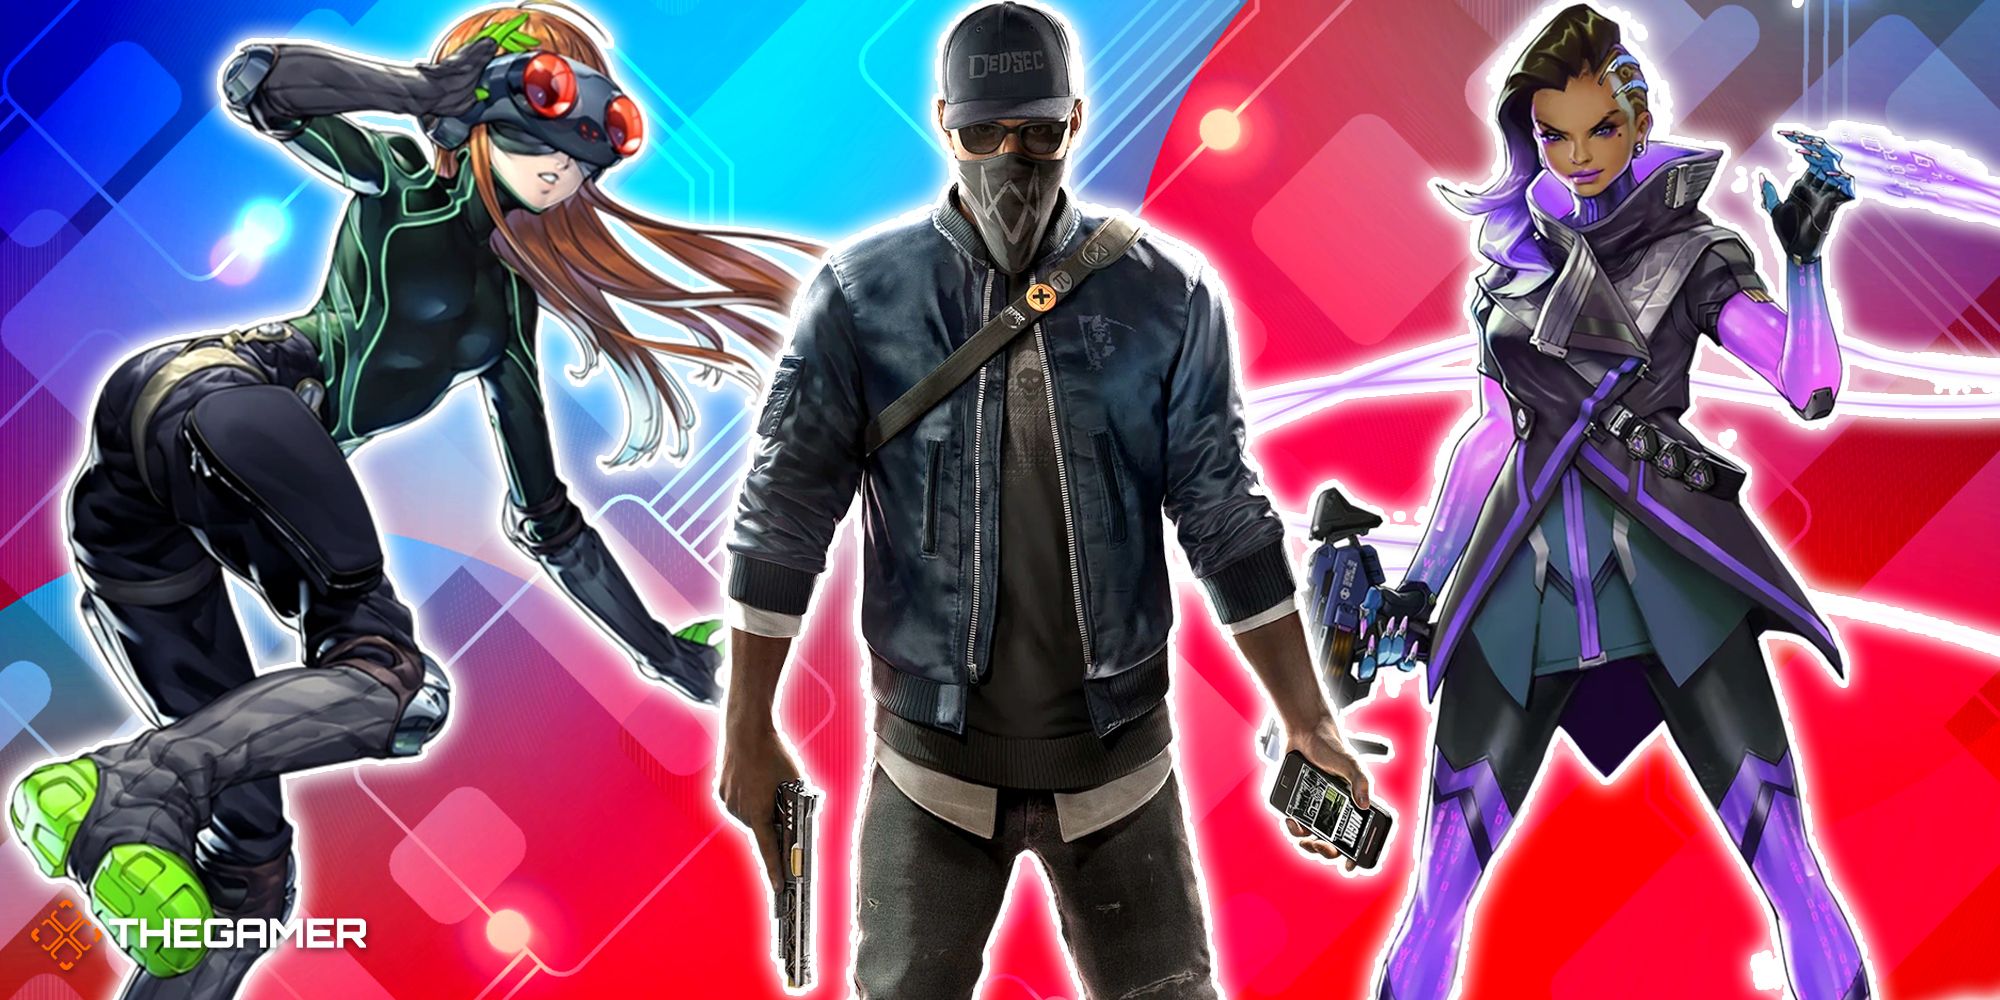 Game art from Watch Dogs 2, Overwatch and Persona 5.